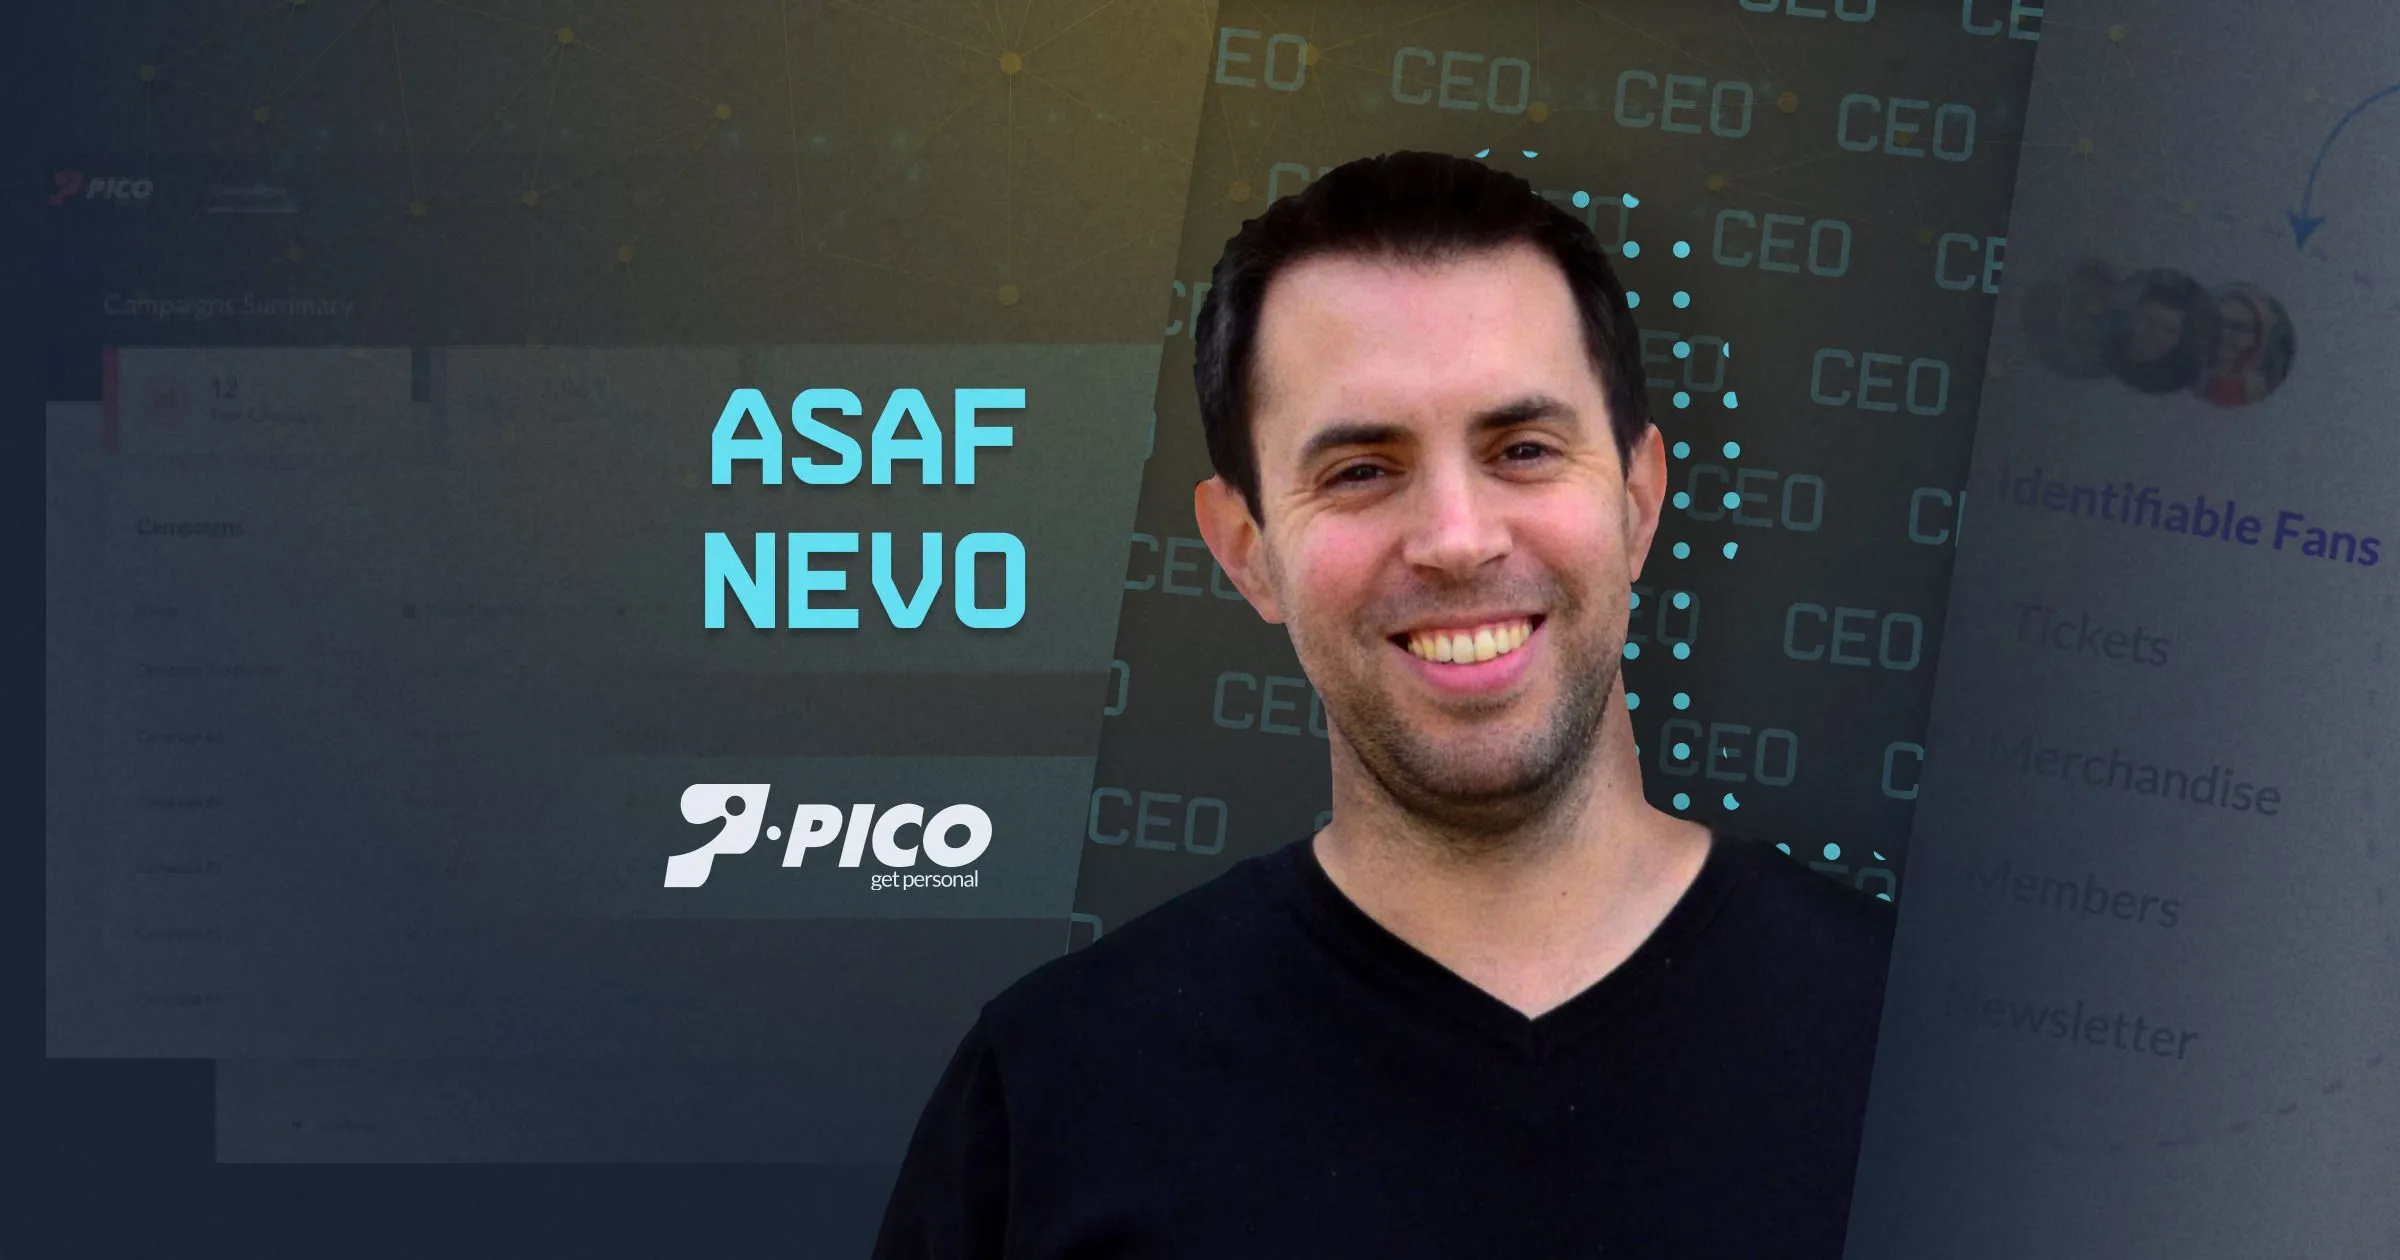 CEO of Pico, Asaf Nevo: Personalizing Fan Experience with AI